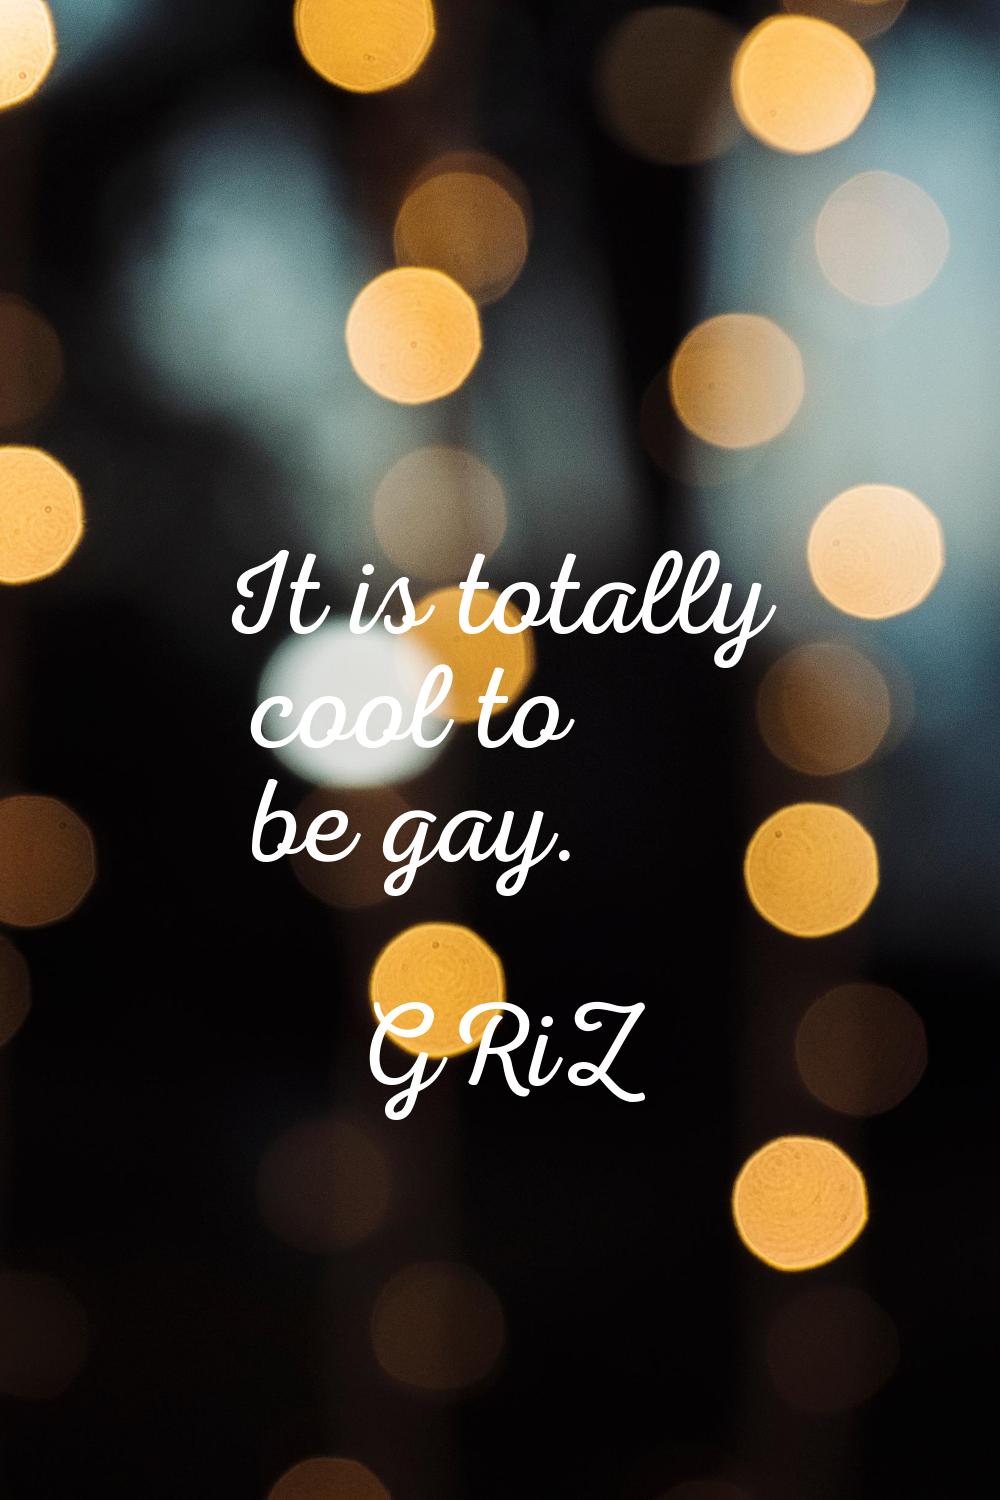 It is totally cool to be gay.